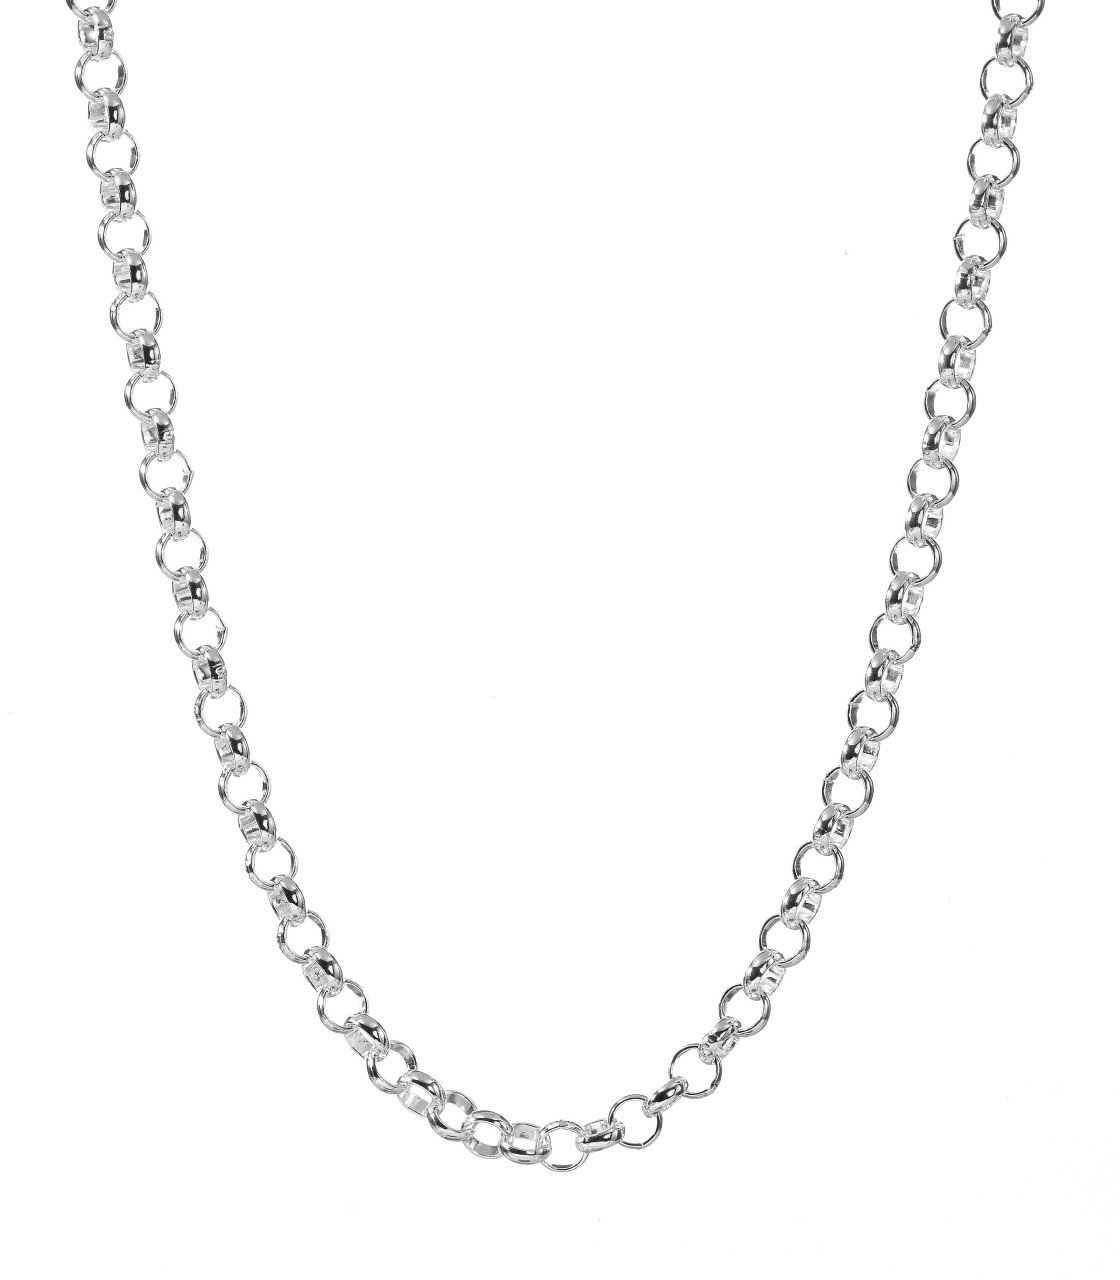 Simple Silver Necklace Chain Necklace Chain Png Preciousjewelrypicture Awesome   Chain Hd Png - Silver, Transparent background PNG HD thumbnail